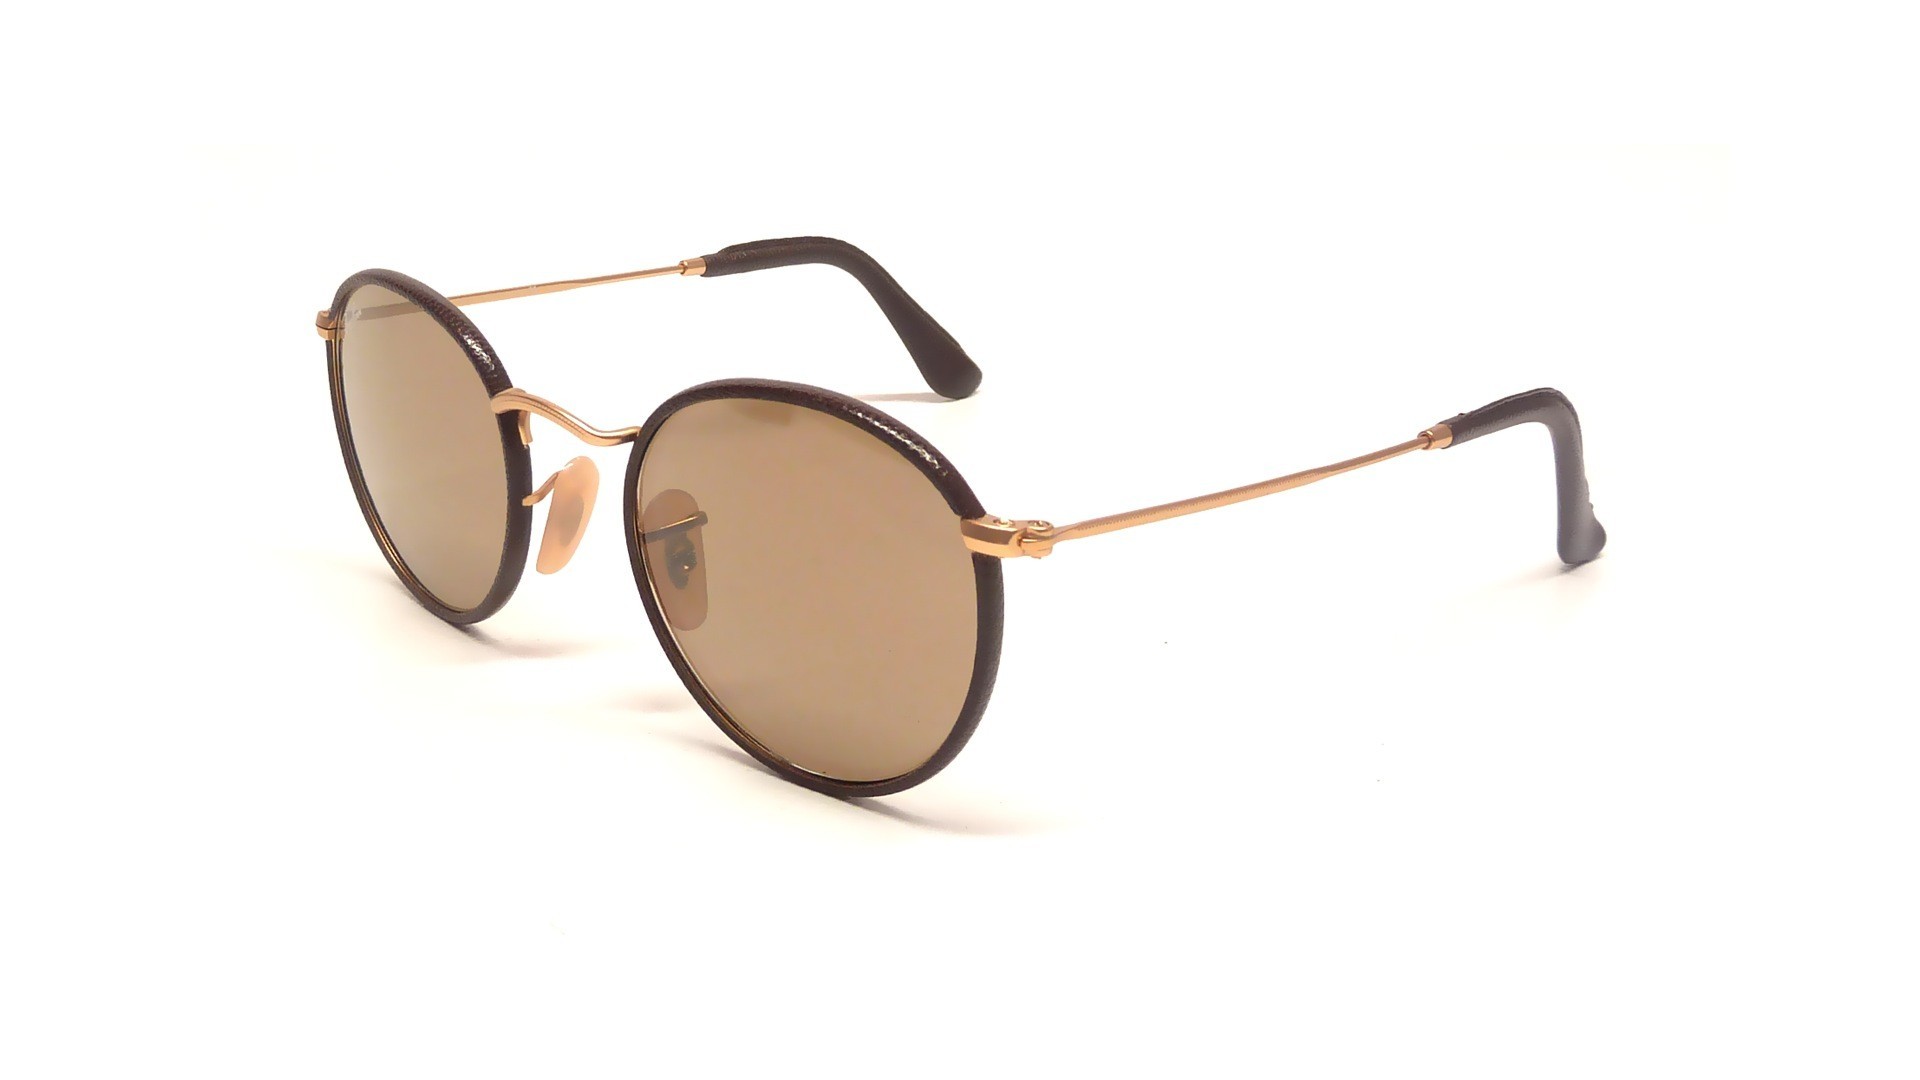 ray ban craft genuine leather collection